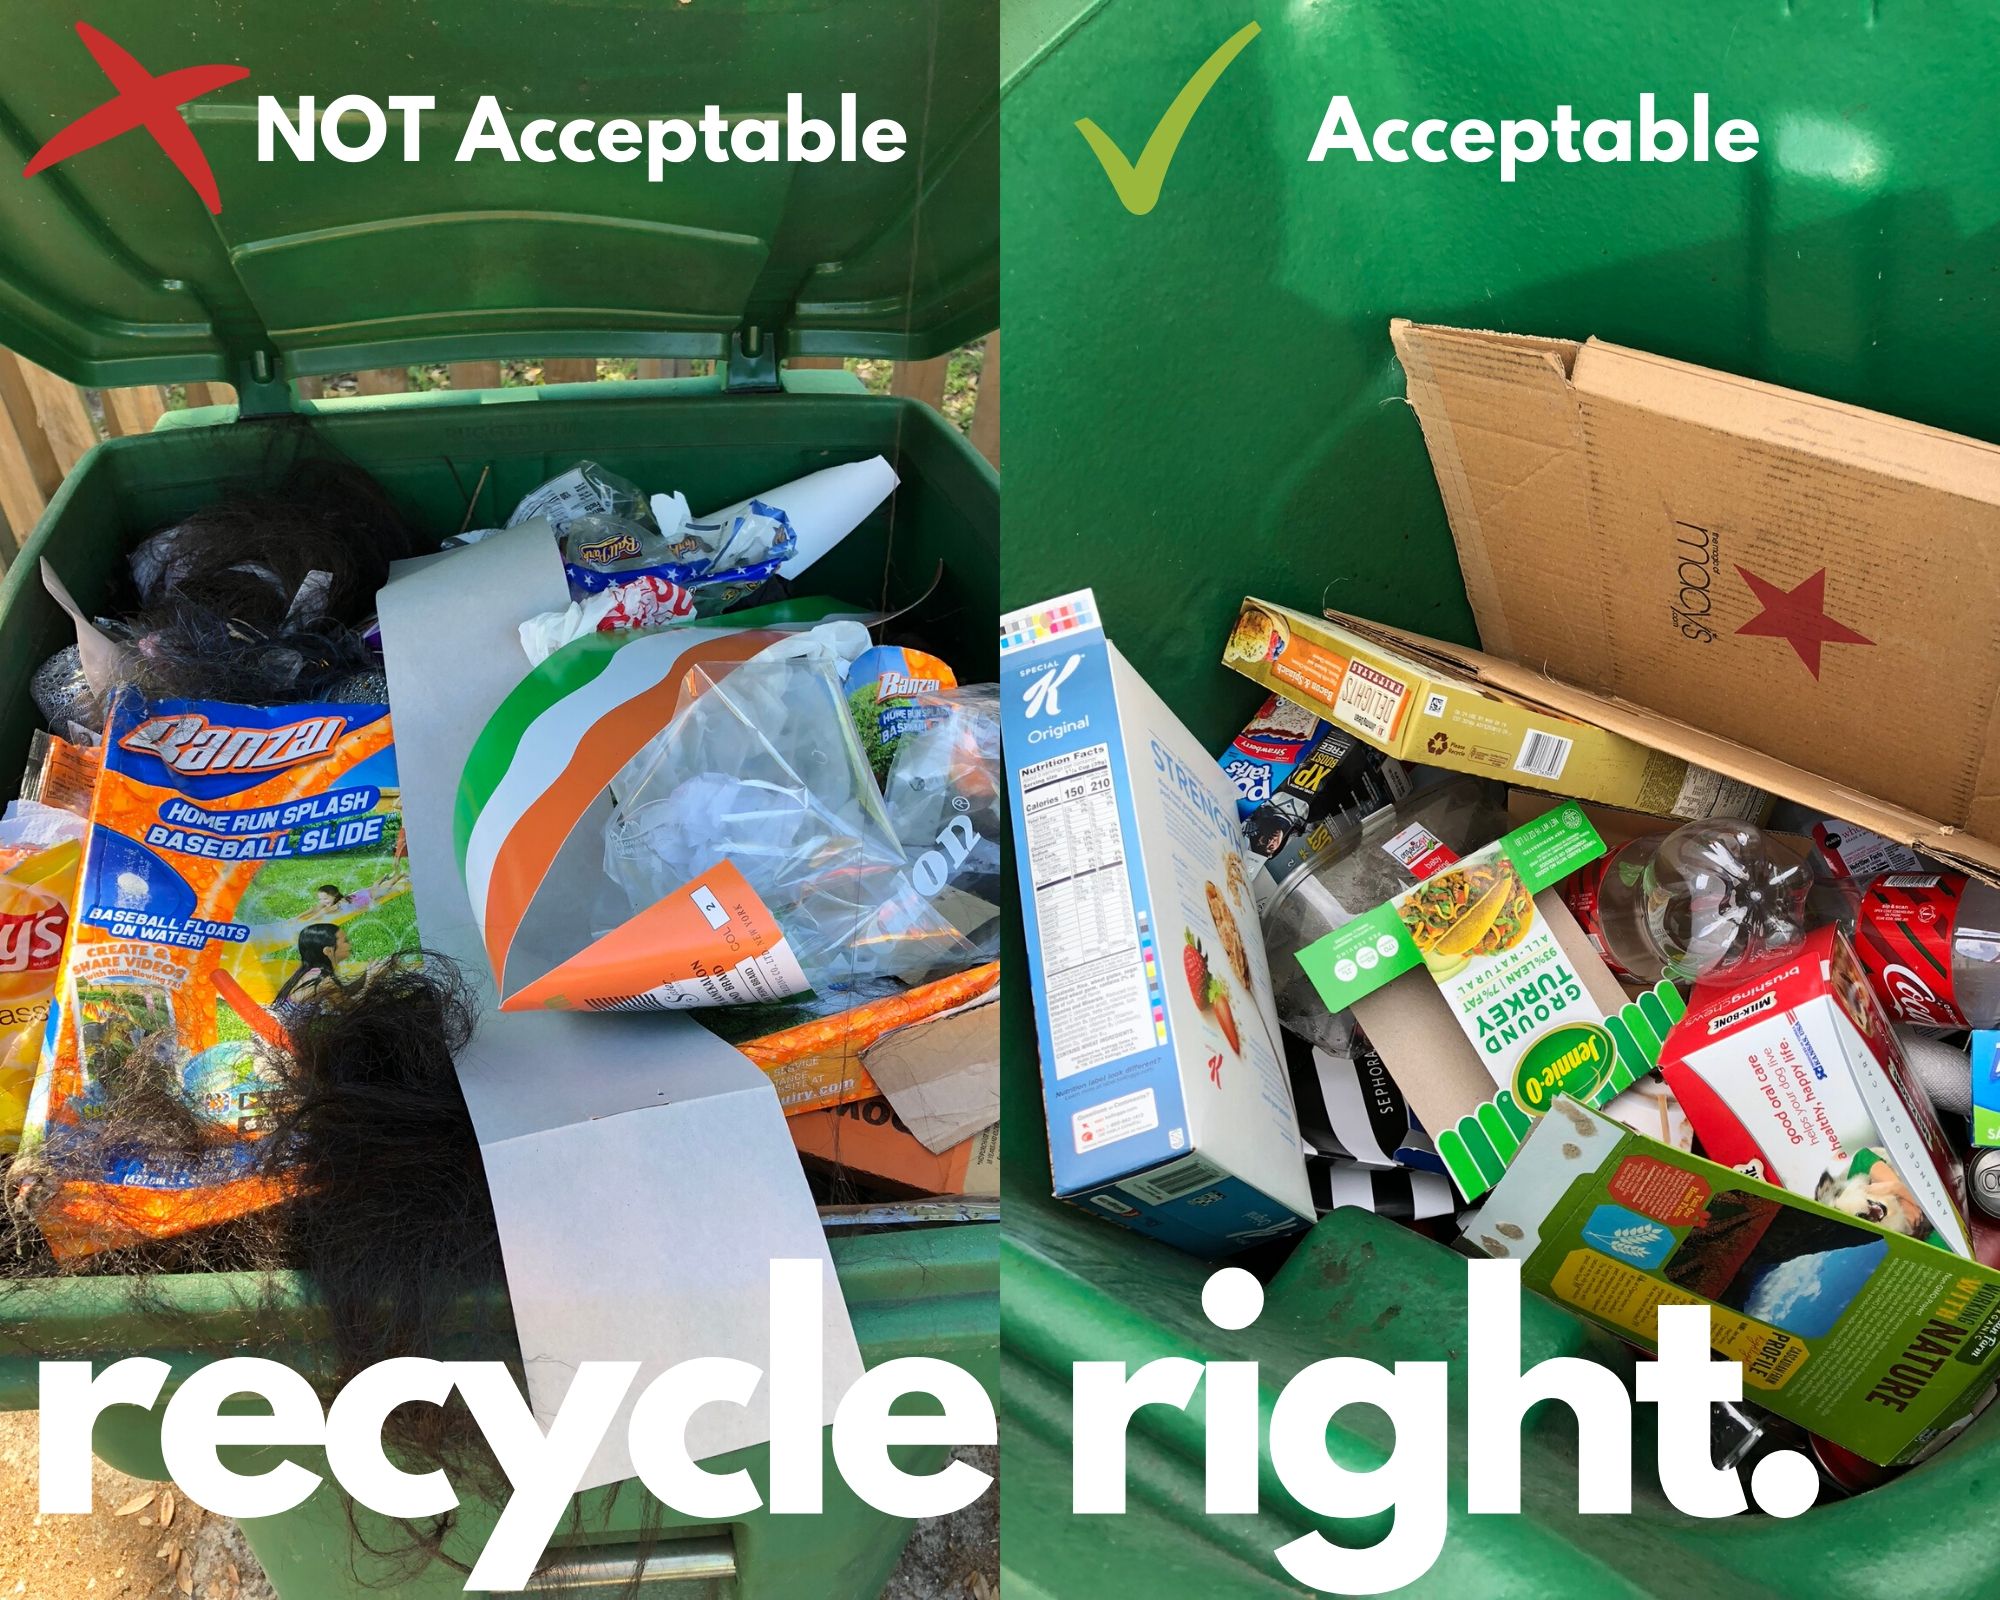 Comparing good and bag recycling: one cart has trash items and one has accepted  items.